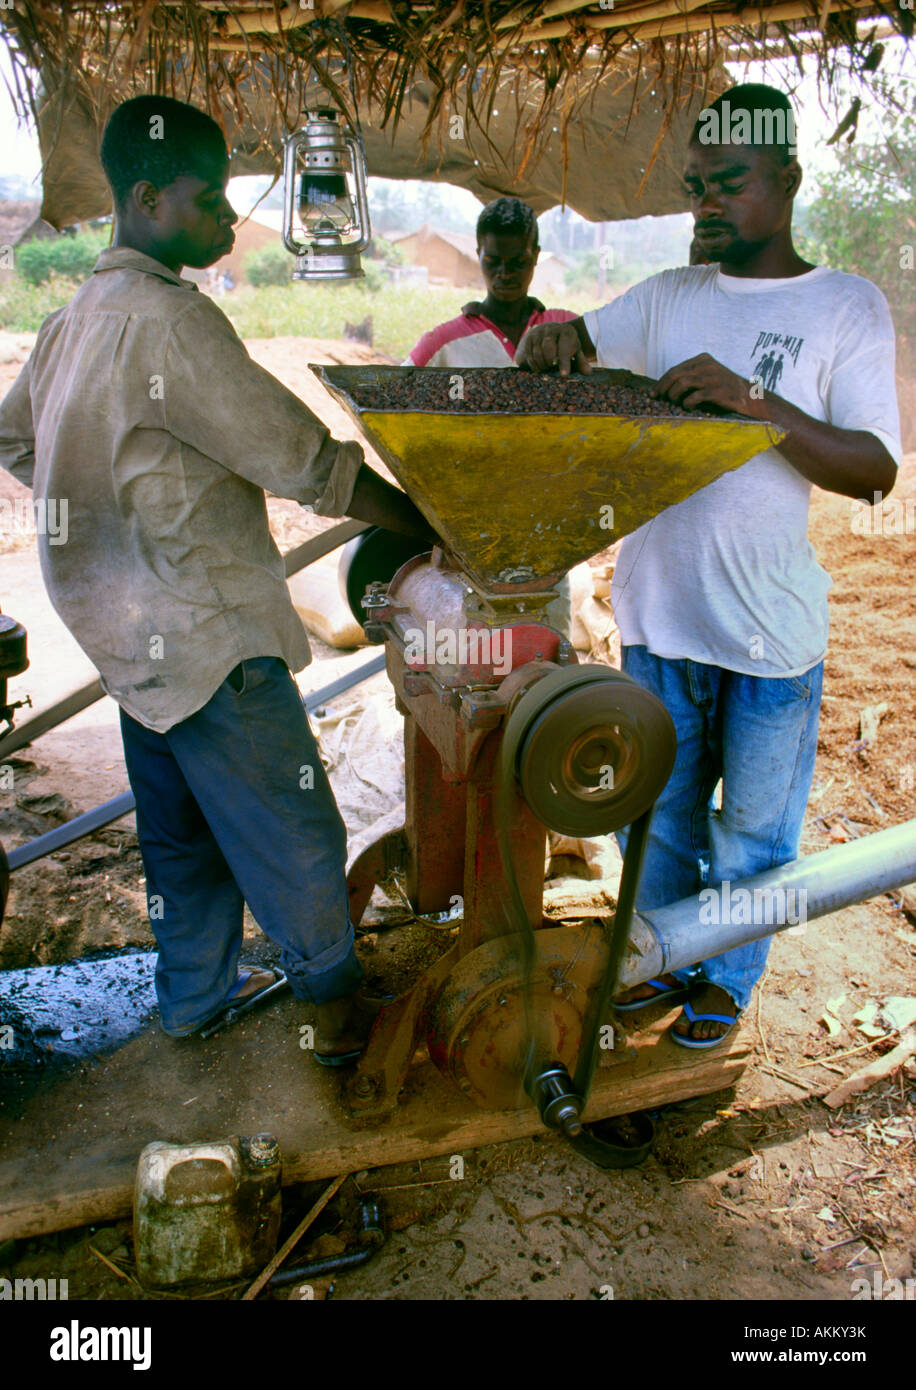 Workers tend to a machine that removes the husk on cocoa beans in Cote d'Ivoire Stock Photo